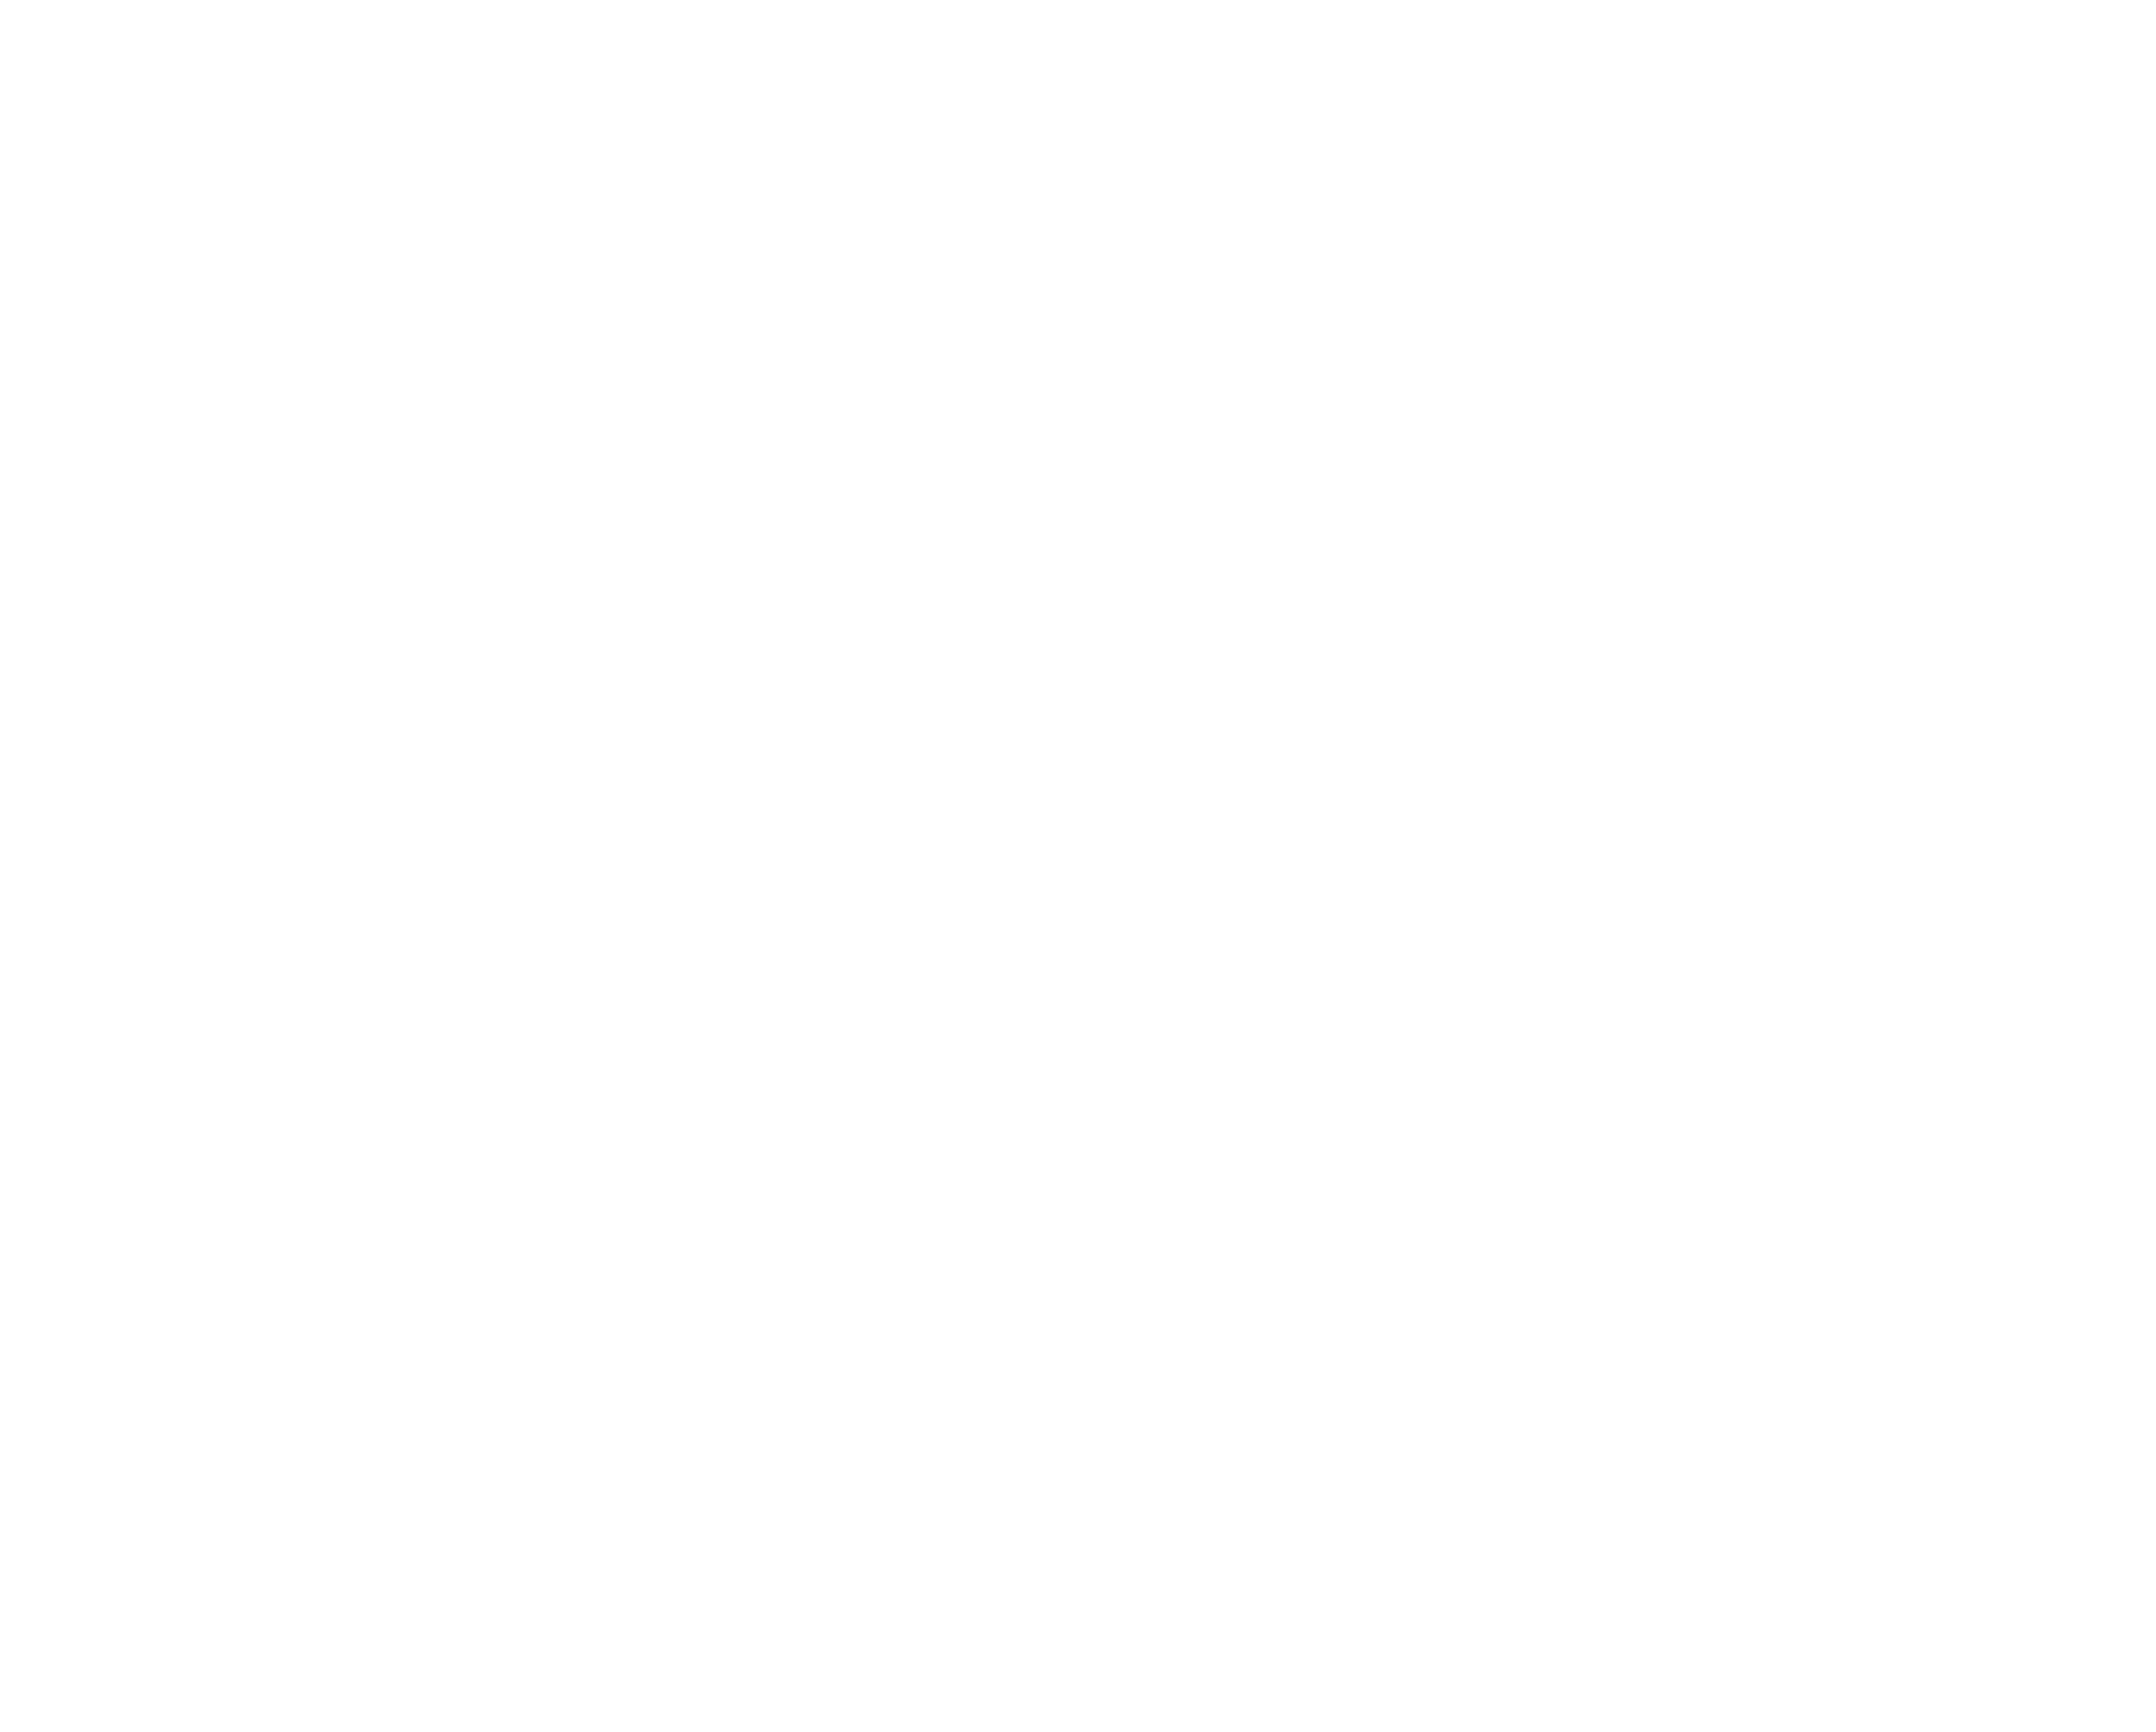 DMB insurance Agency Best Life Insurance Company in Texas